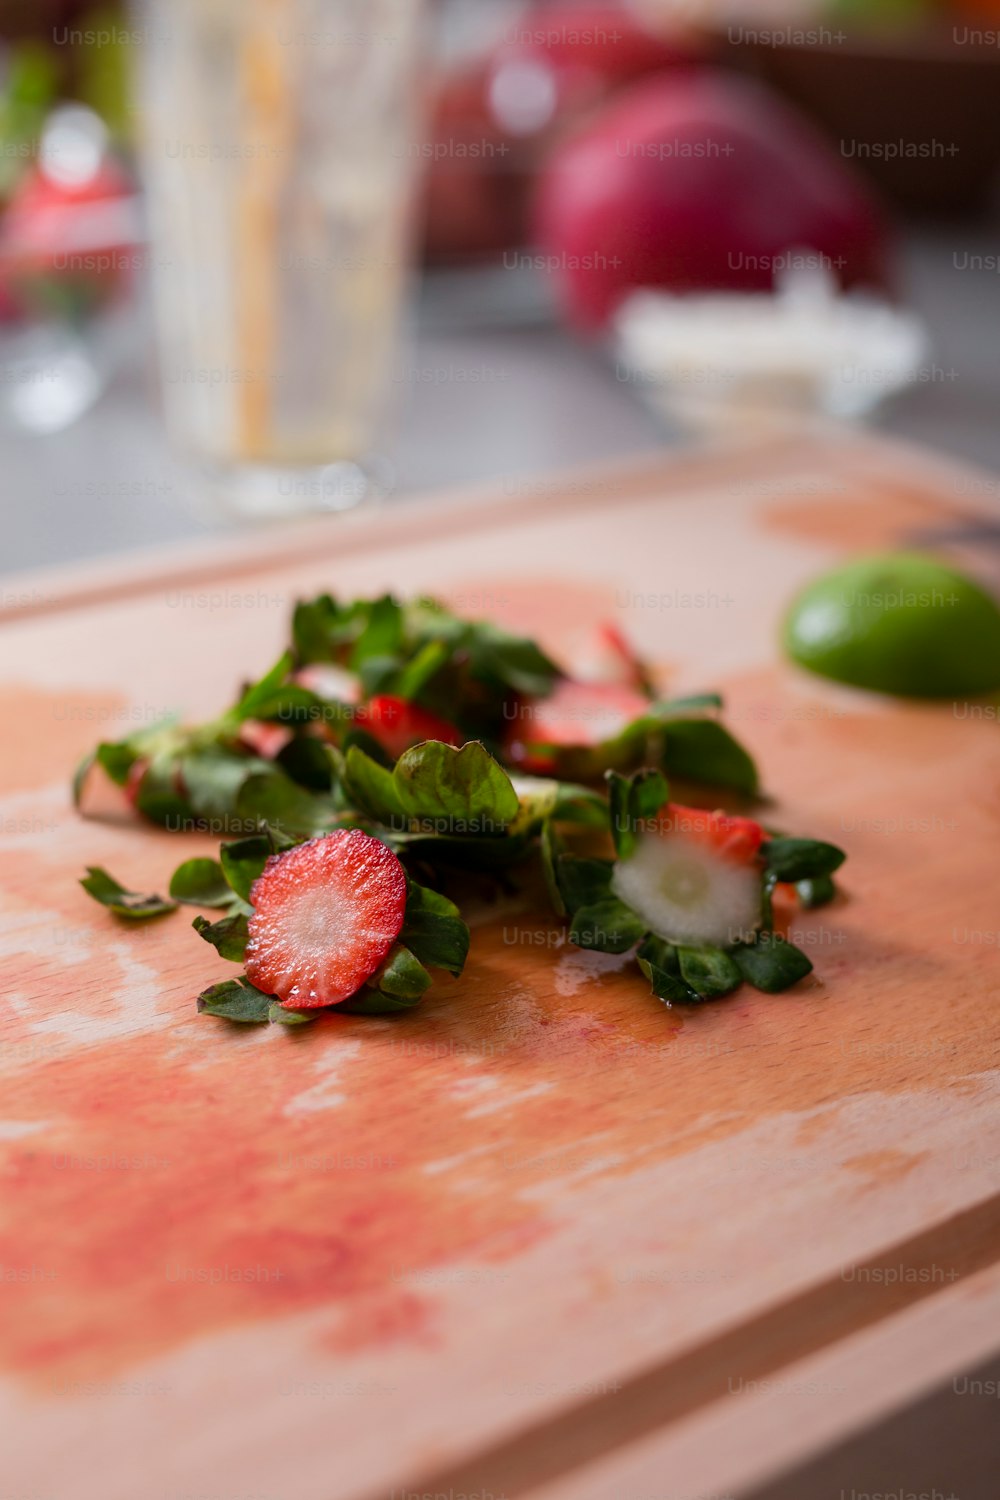 Strawberries cuttings on a chopping board in kitchen, healthy lifestyle concept.